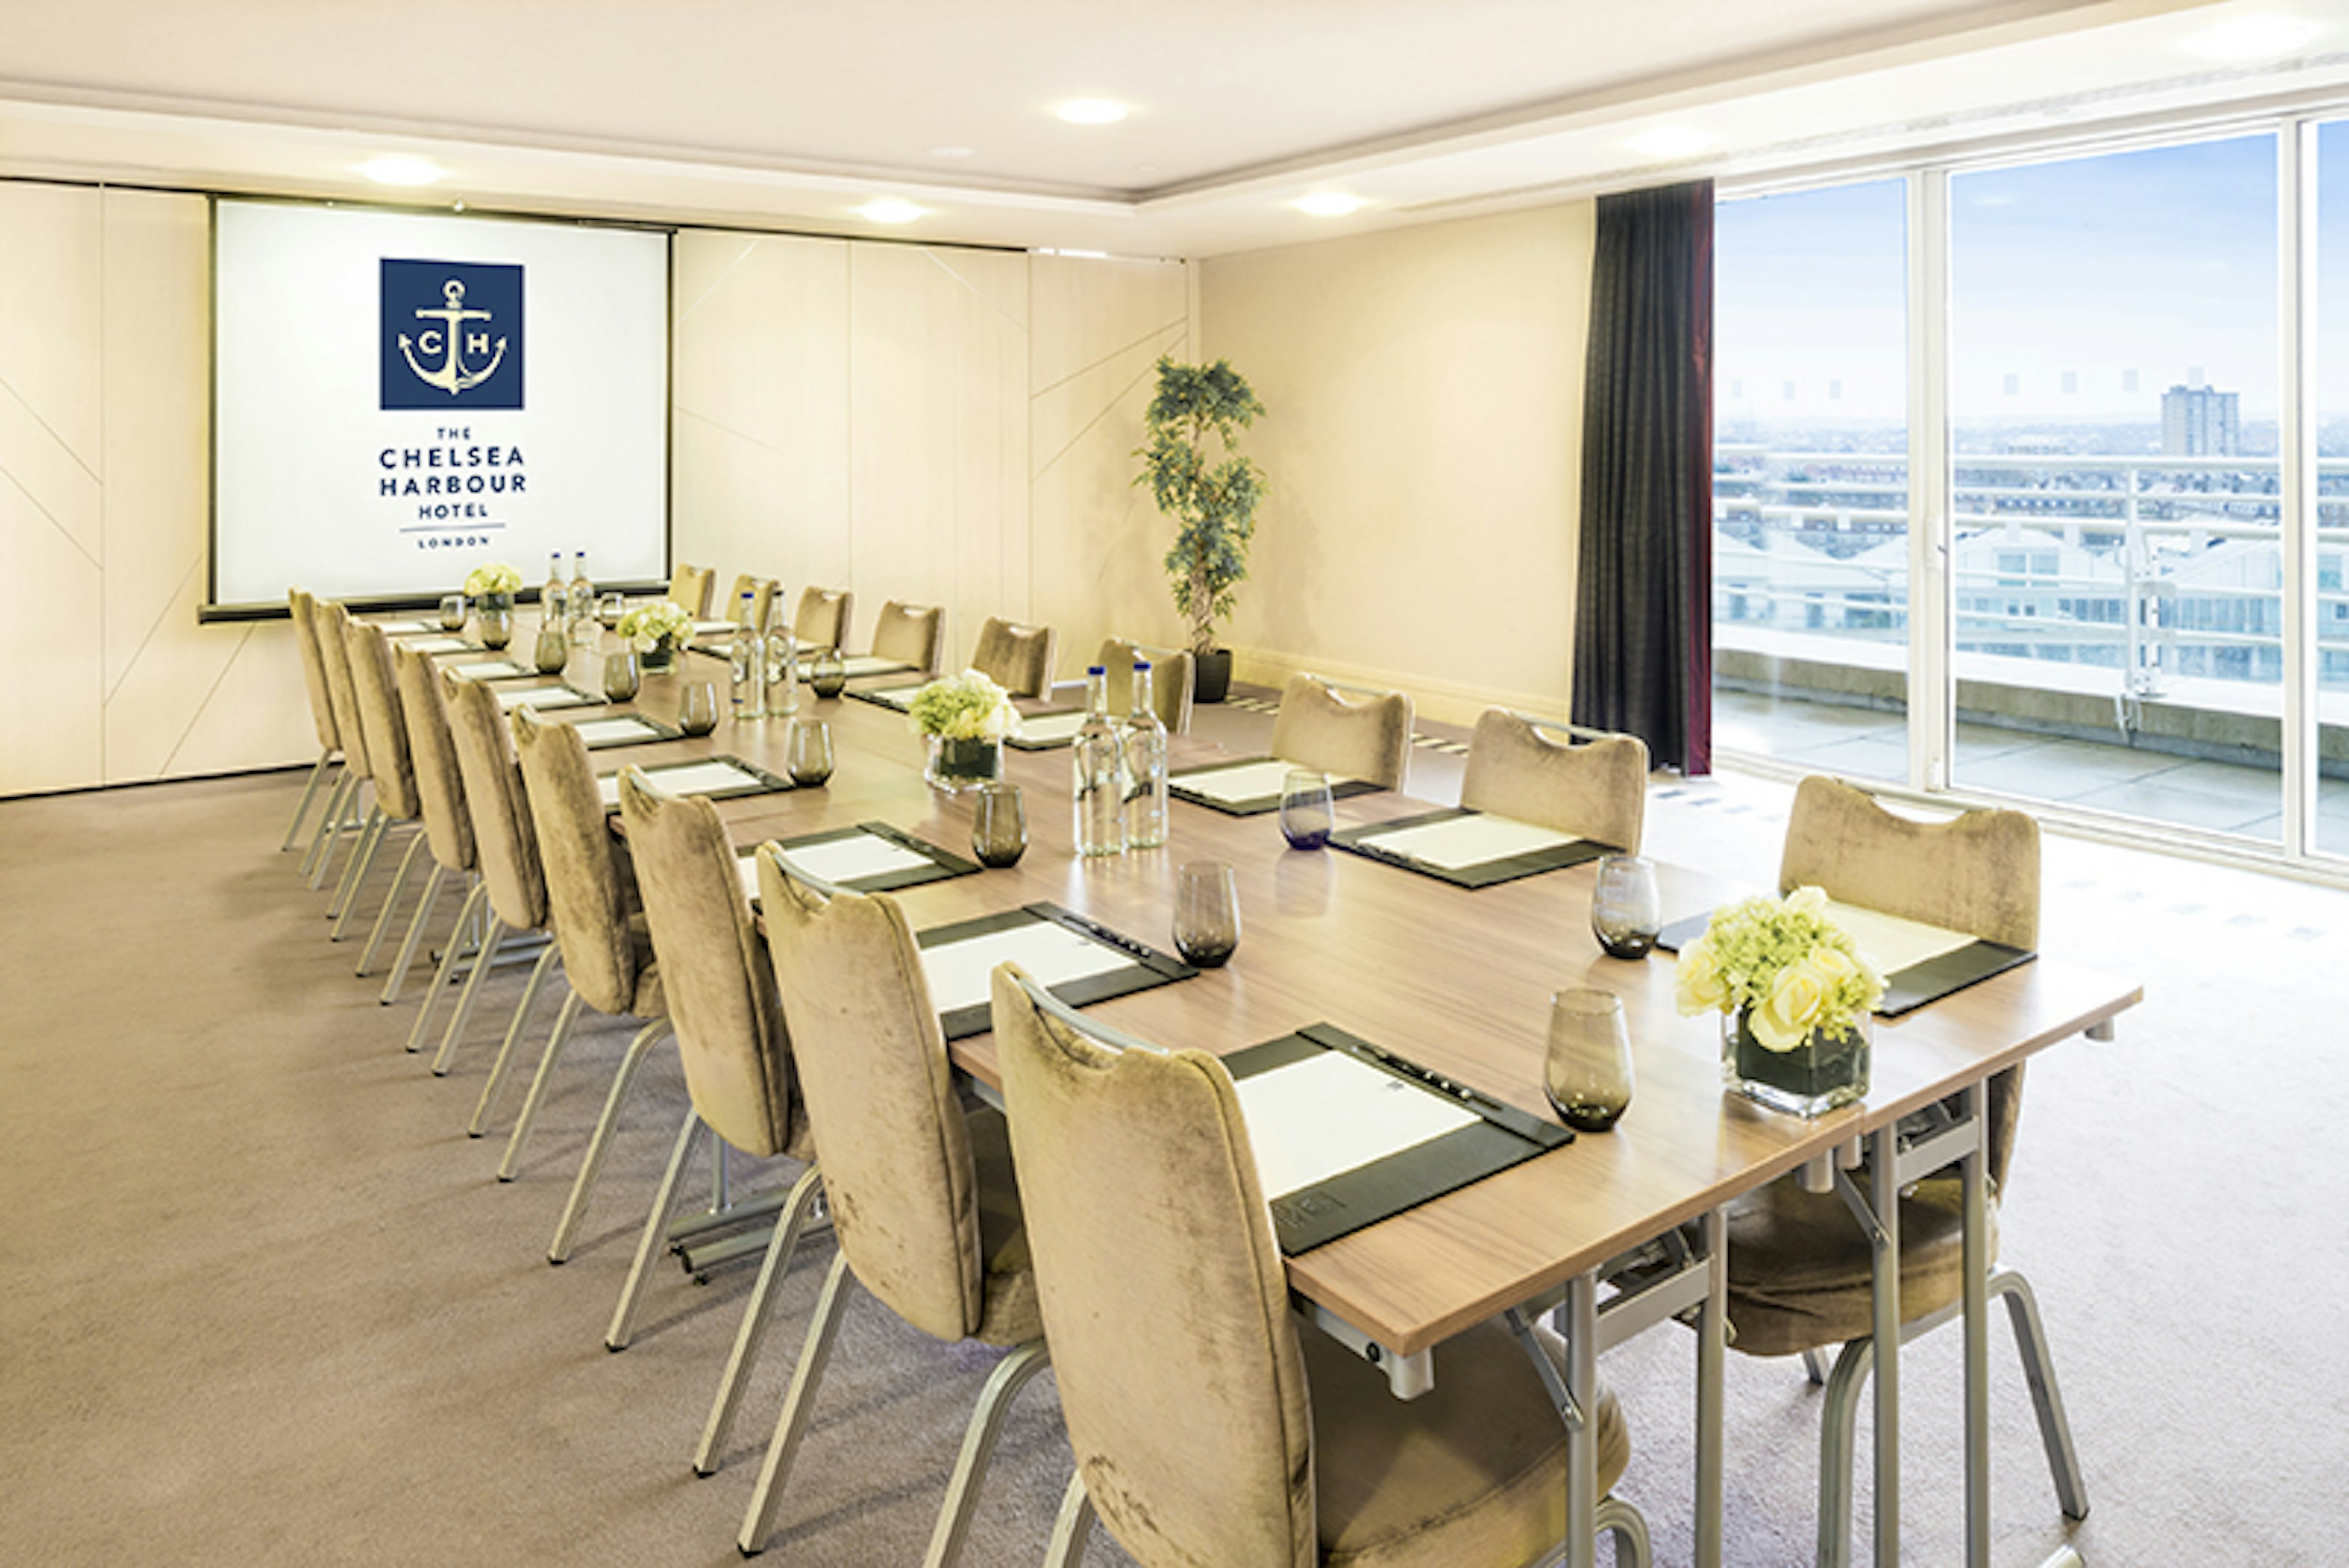 Conference Hotels - The Chelsea Harbour Hotel - Business in Battersea Suite - Banner